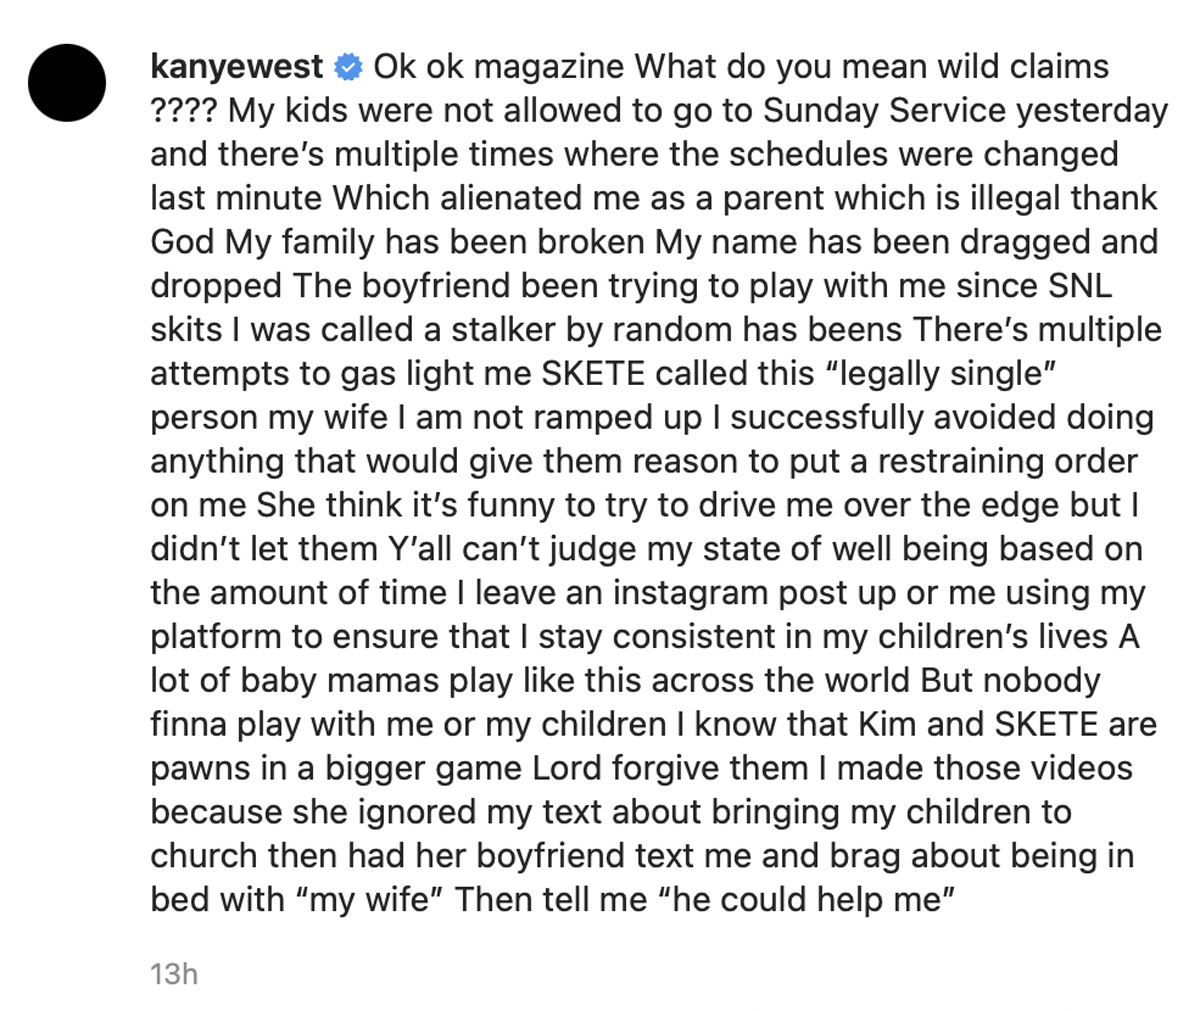 Kanye West Denies Lying About Seeing His Kids, Explains He Feels 'Alienated' As A Parent After They Couldn't Go To Sunday Service